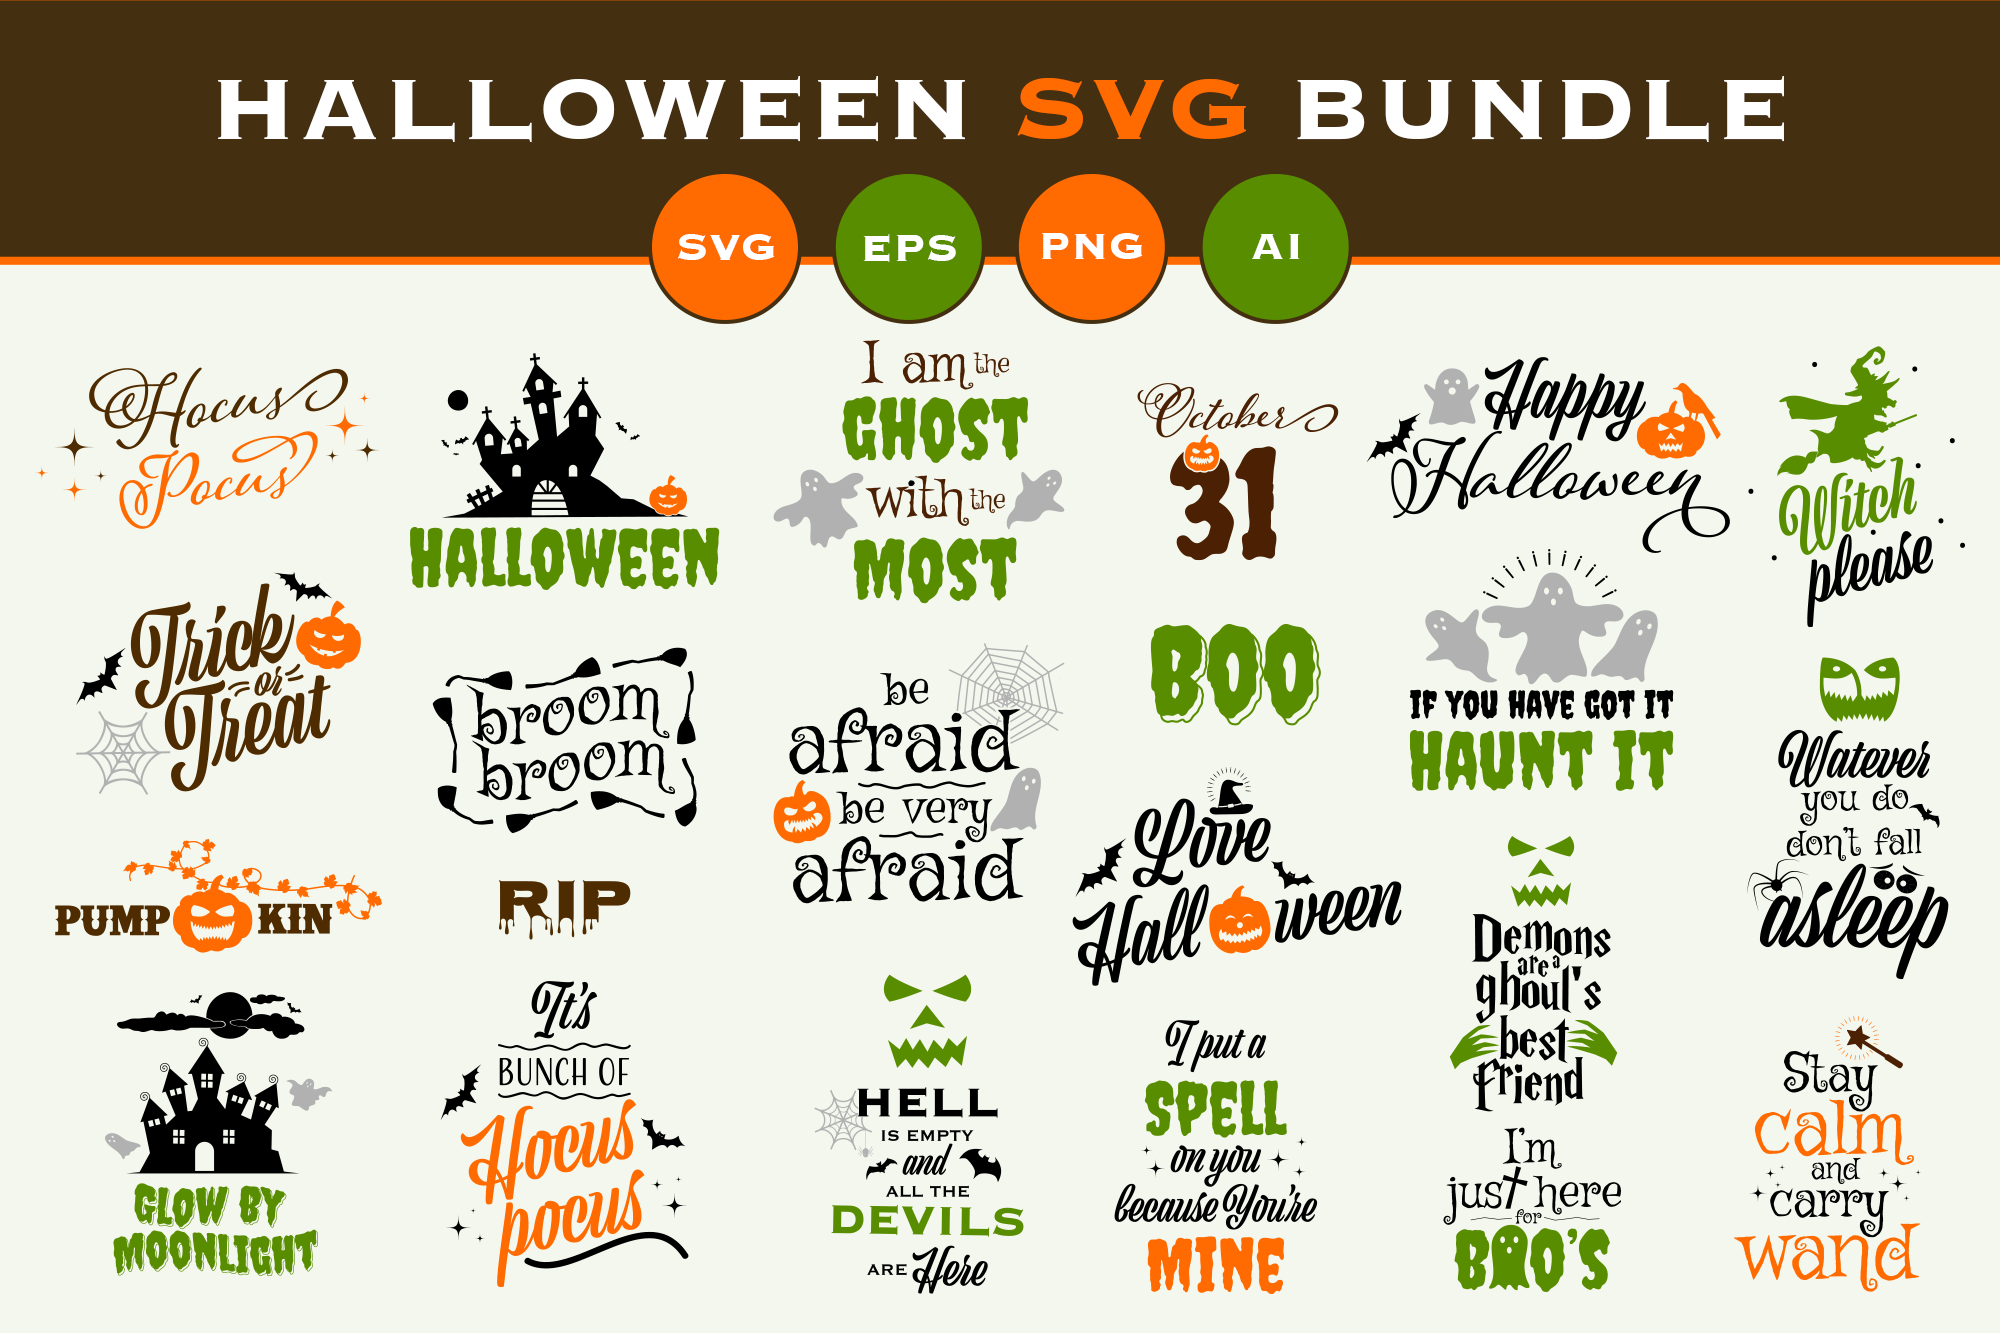 Download Halloween Svgs Free Free Svg Cut Files Create Your Diy Projects Using Your Cricut Explore Silhouette And More The Free Cut Files Include Svg Dxf Eps And Png Files Yellowimages Mockups